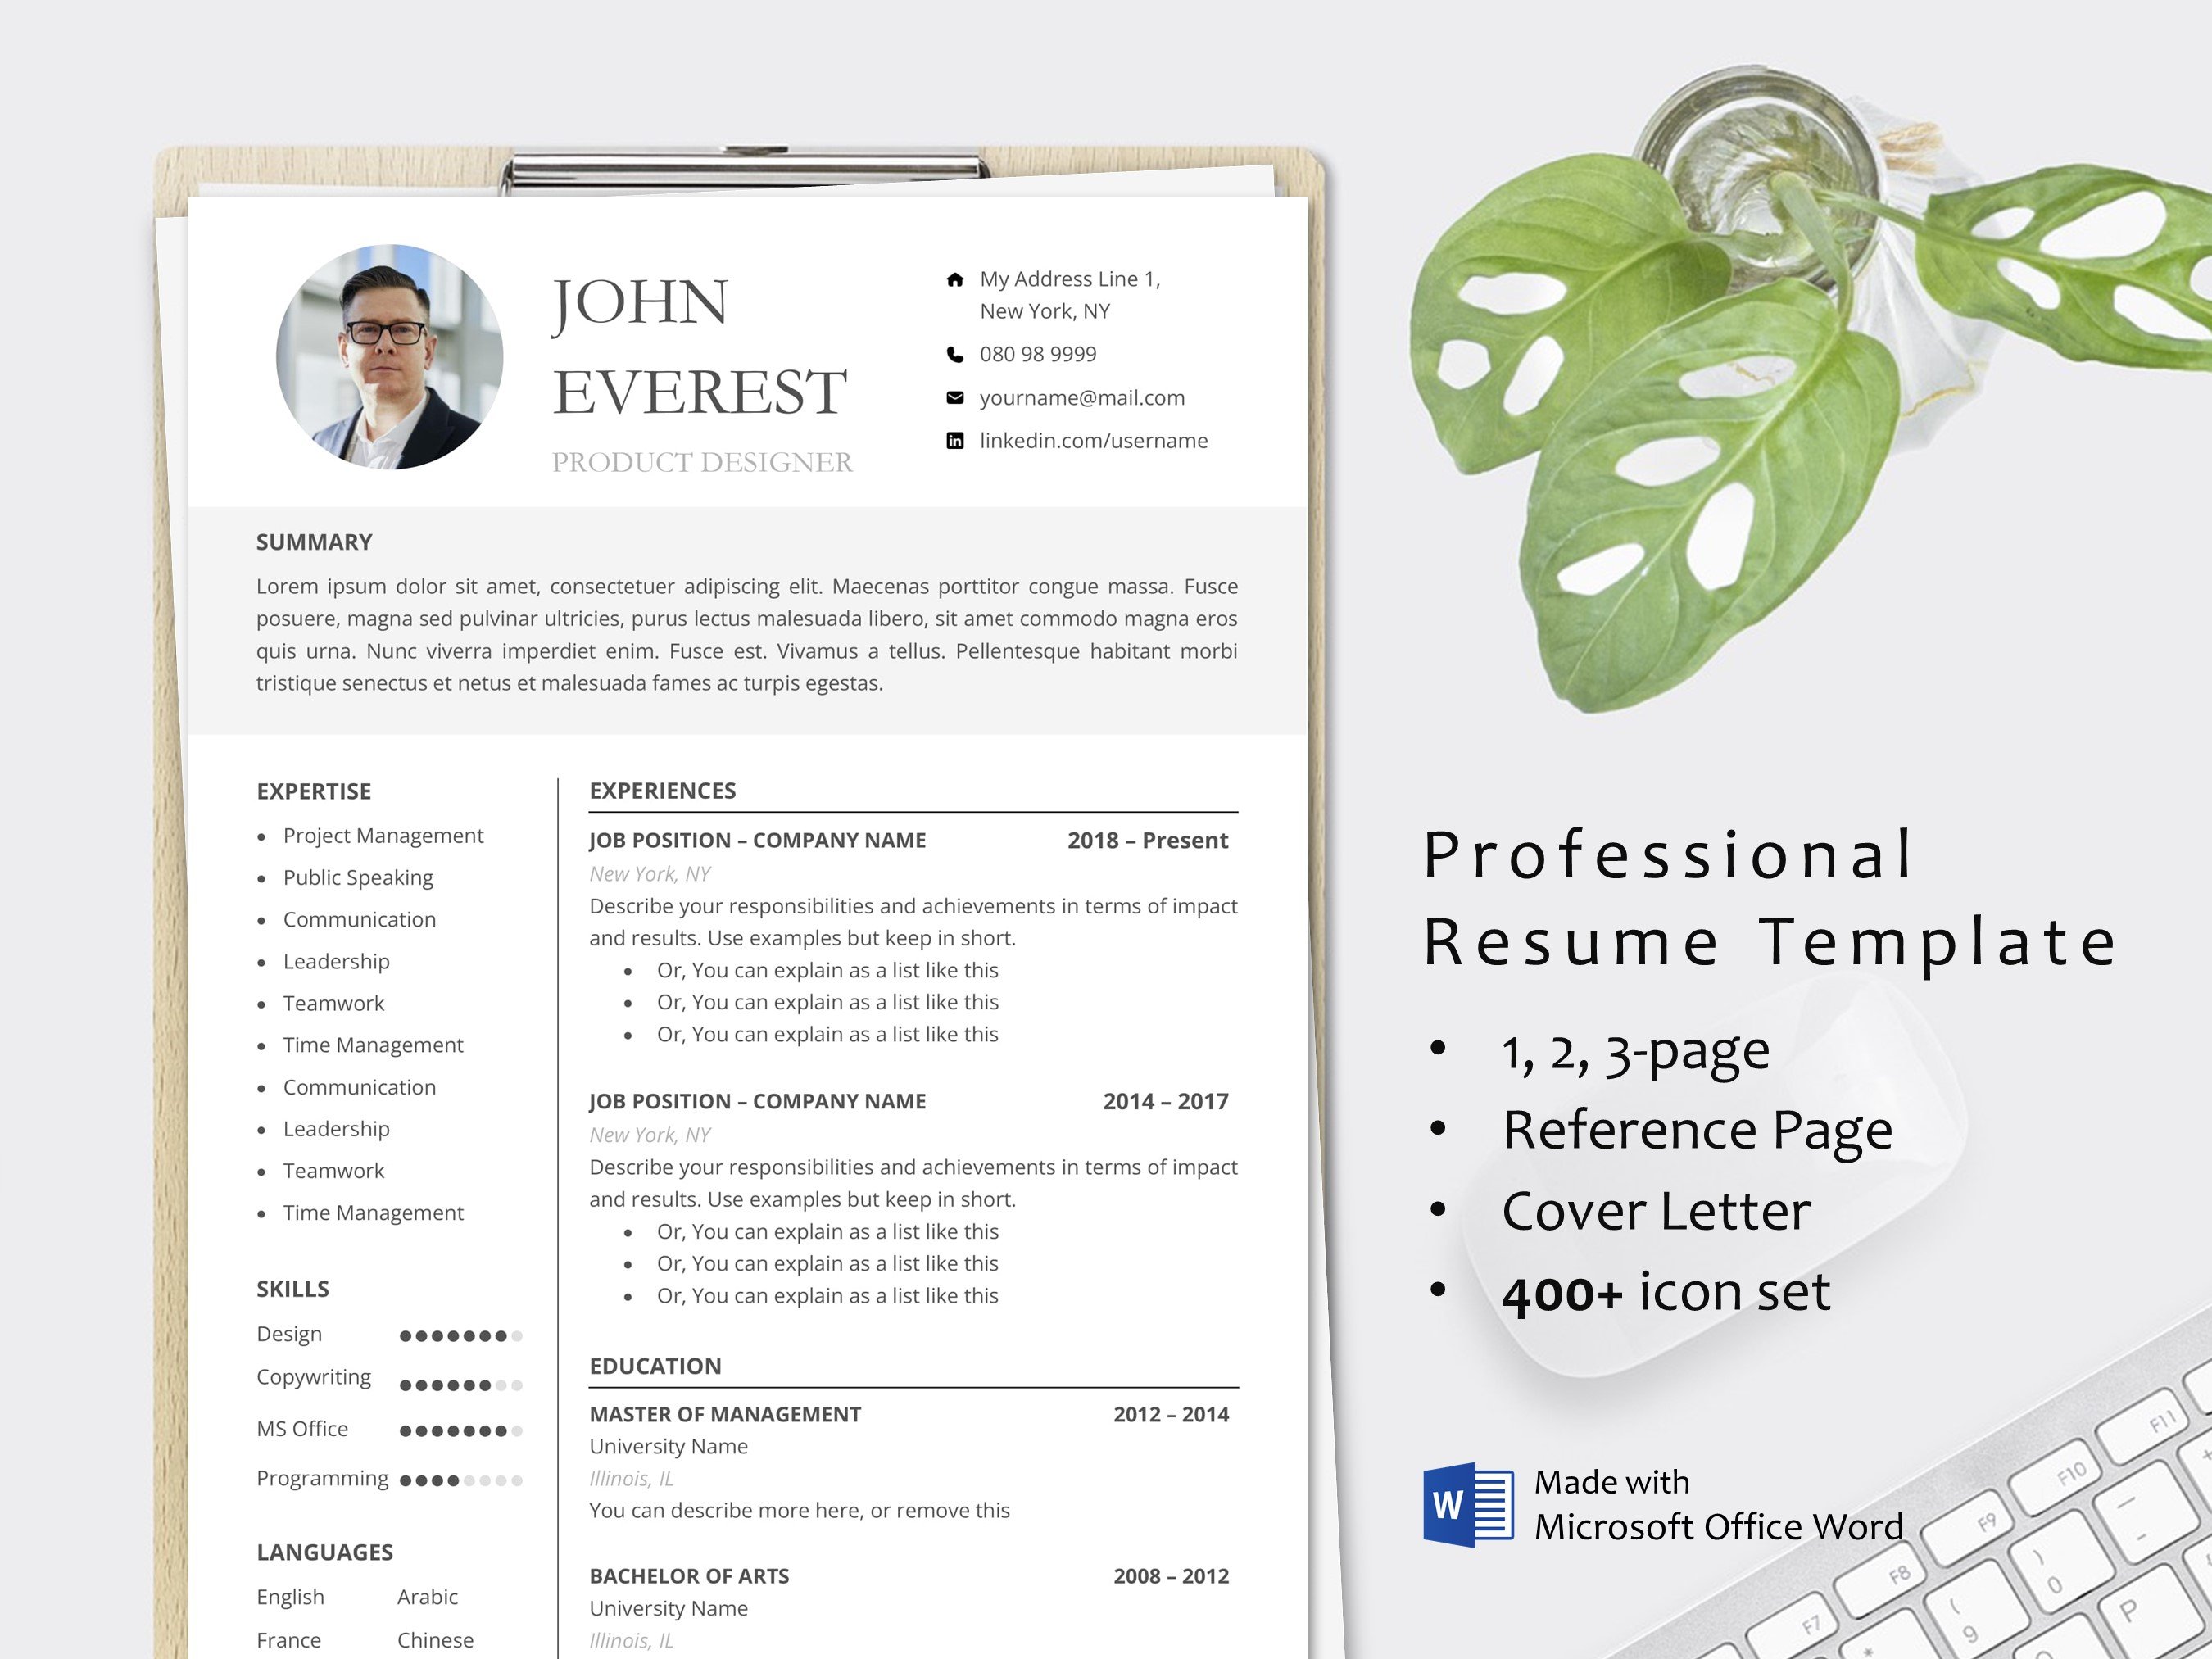 Minimal Business CV Resume Template cover image.